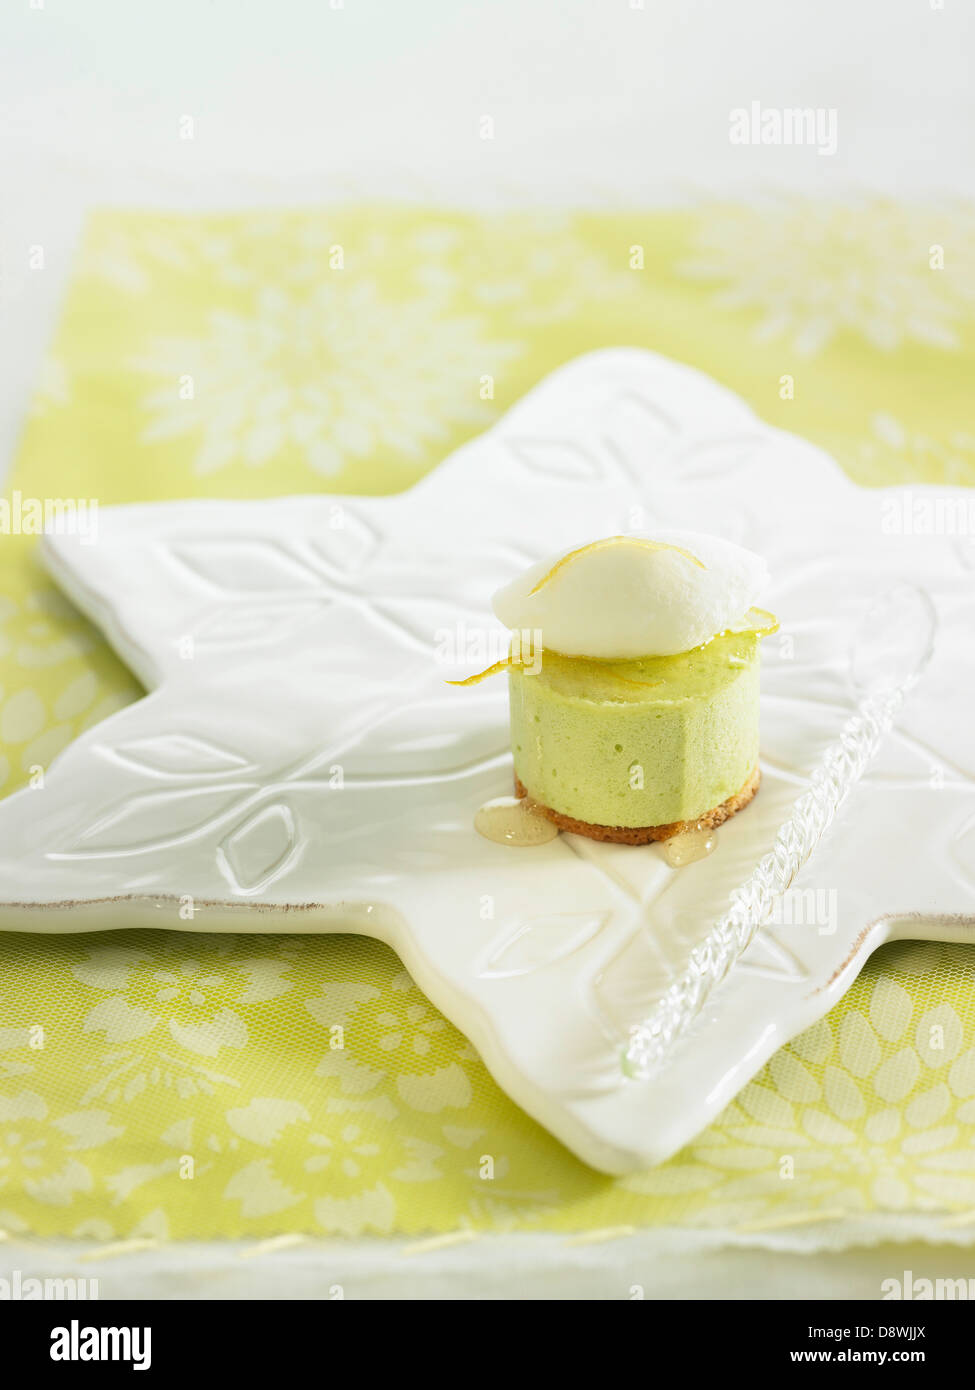 Shortbread and lemon-Granny Smith apple mousse dessert topped with yoghurt ice cream Stock Photo